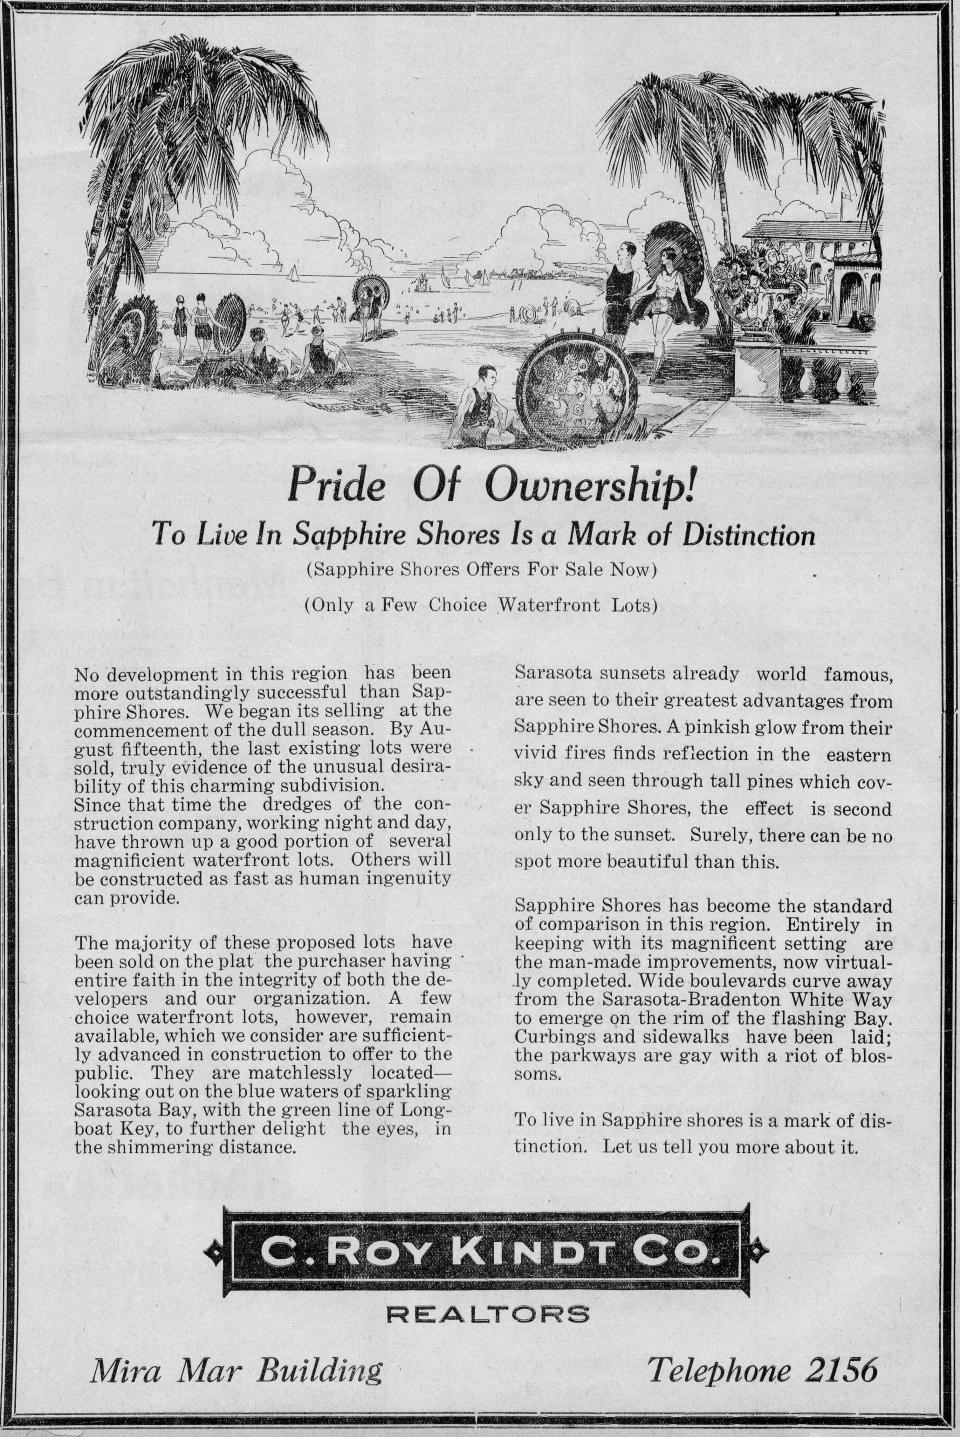 Living in Sapphire Shores was a “mark of distinction,” according to this advertisement for the North Sarasota neighborhood.